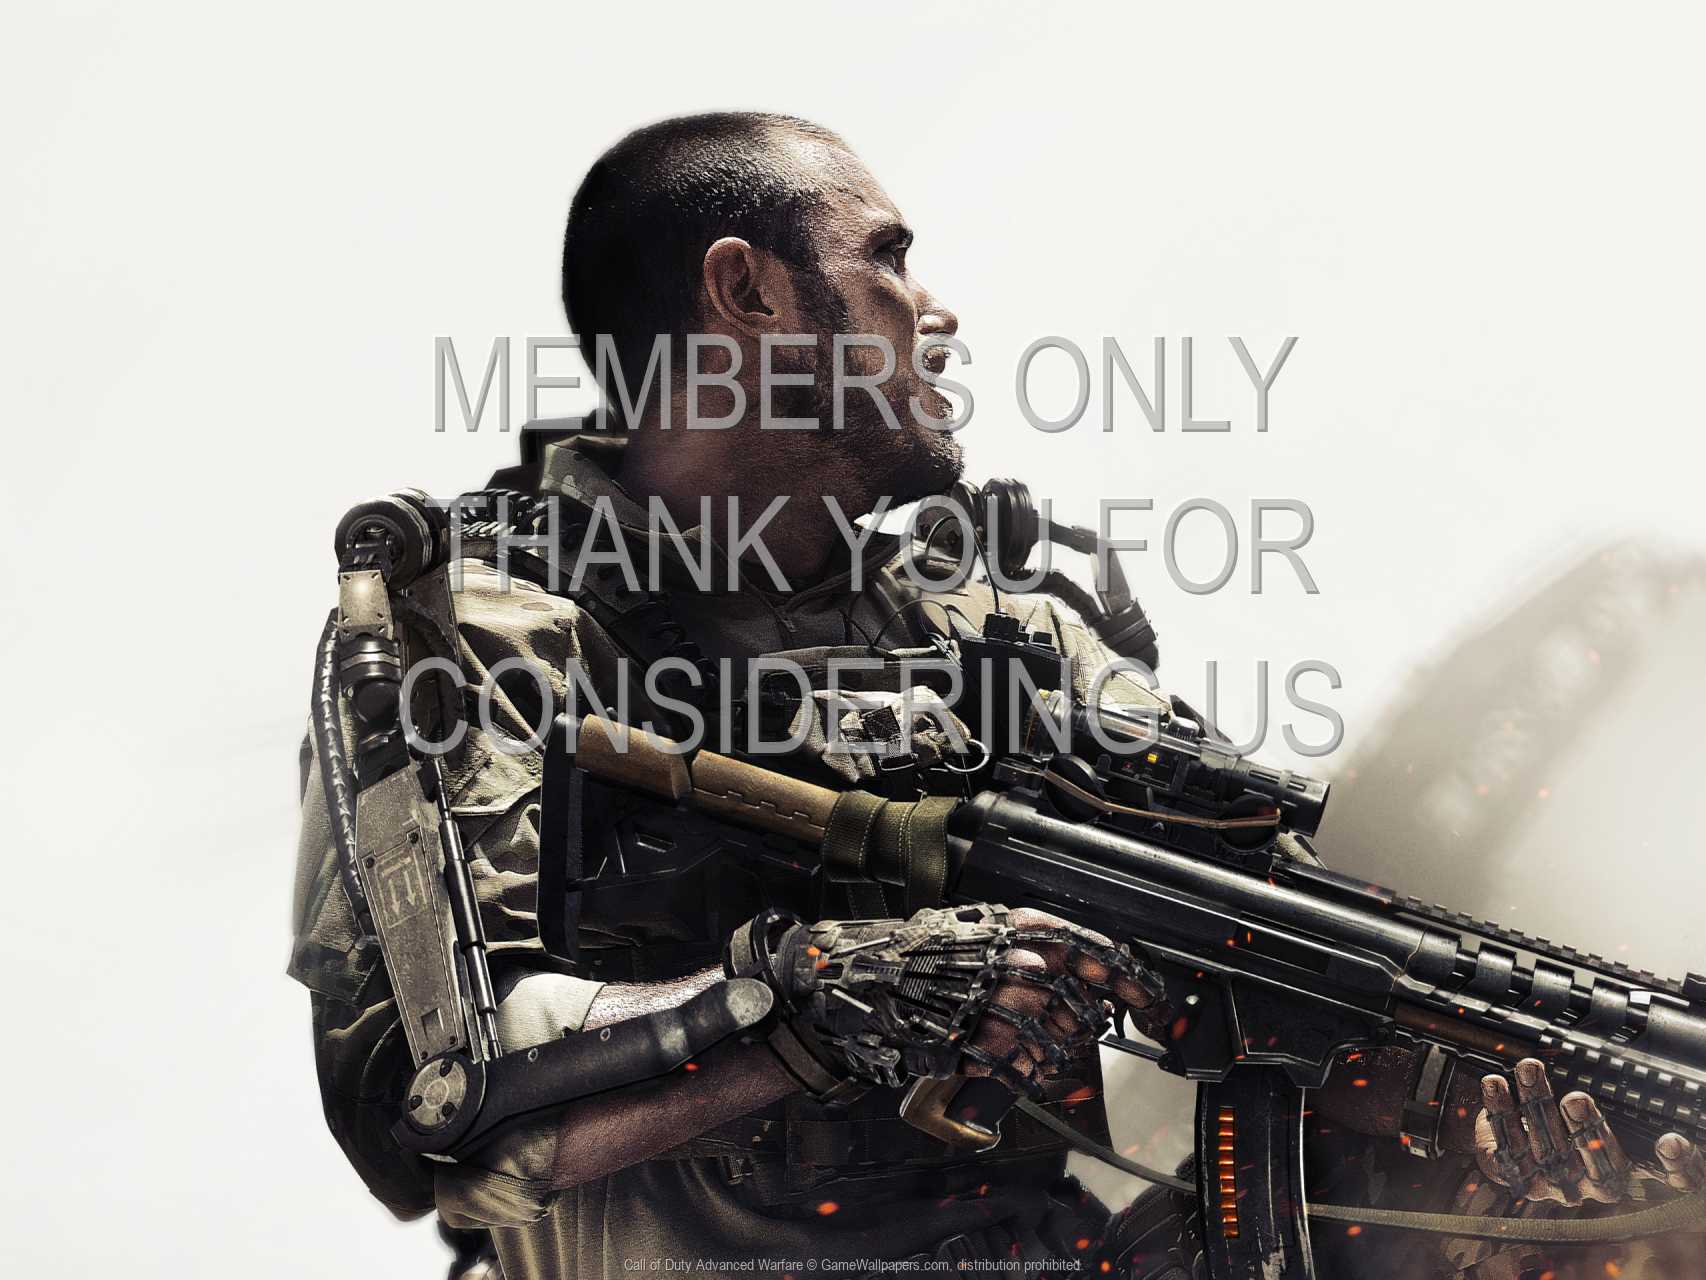 Call of Duty: Advanced Warfare 720p Horizontal Mobile wallpaper or background 01